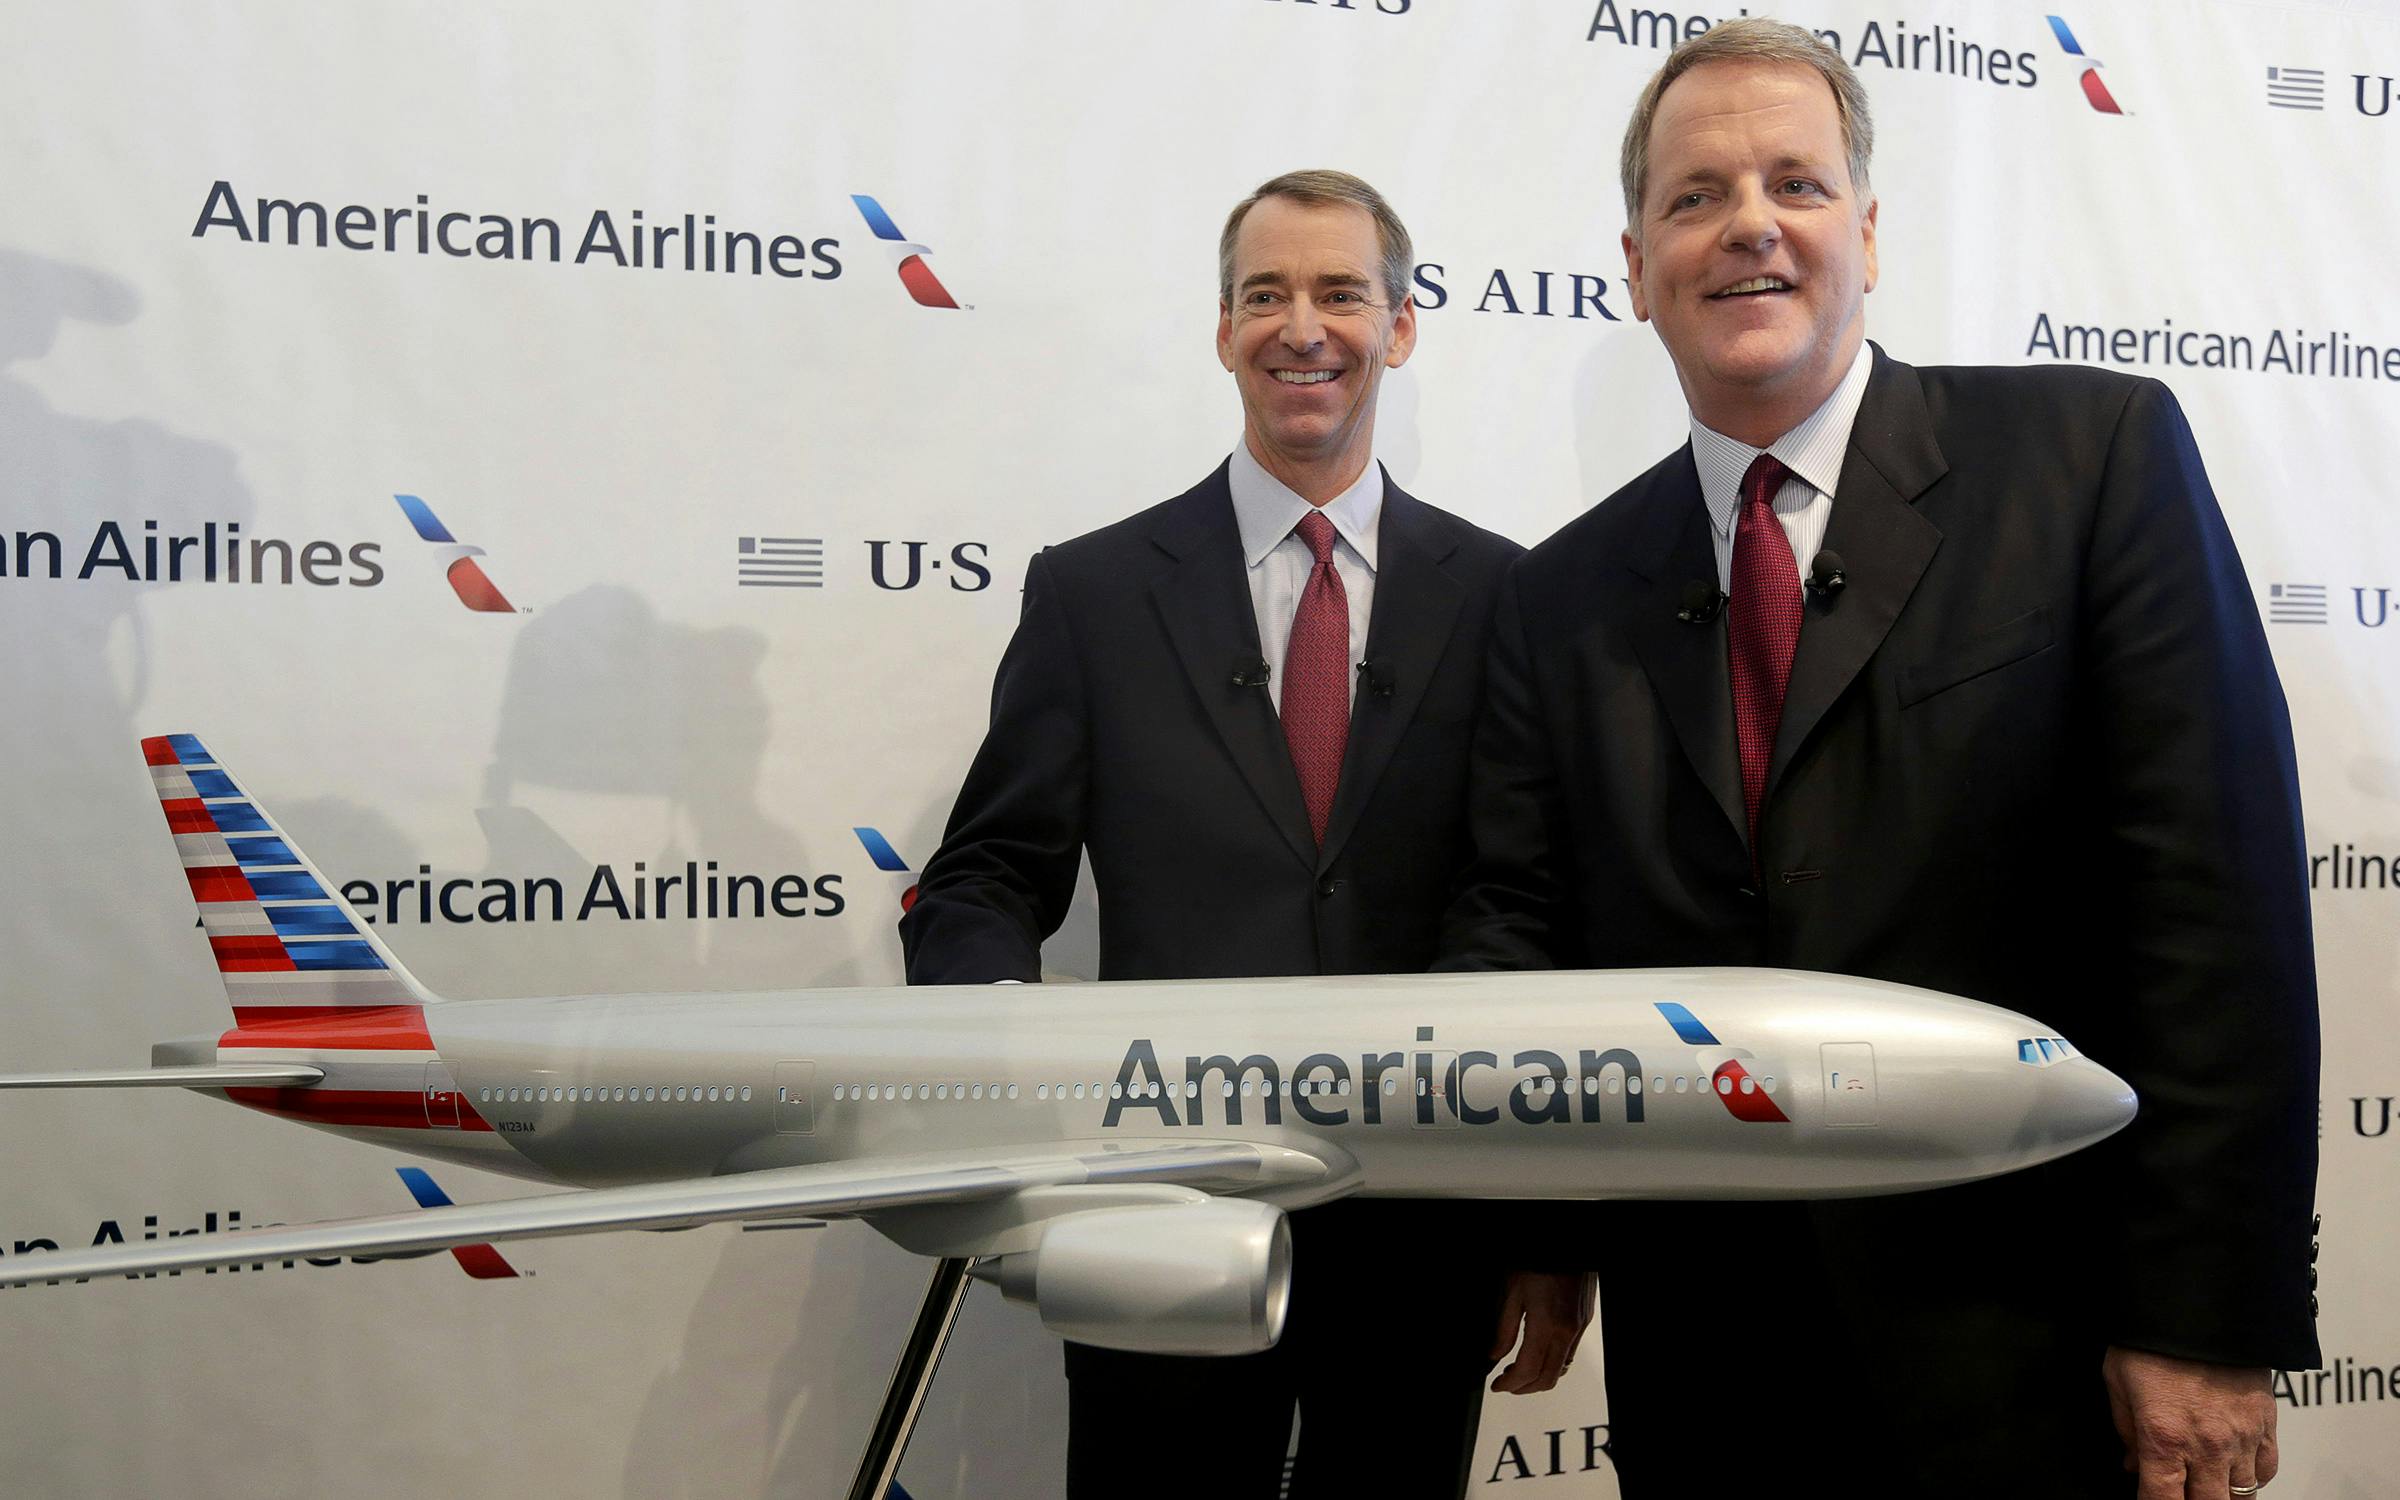 U.S. Airways CEO Doug Parker, right, and American Airlines CEO Tom Horton pose after a news conference at DFW International Airport Thursday, Feb. 14, 2013, in Grapevine, Texas. The two airlines will merge forming the world's largest airlines.